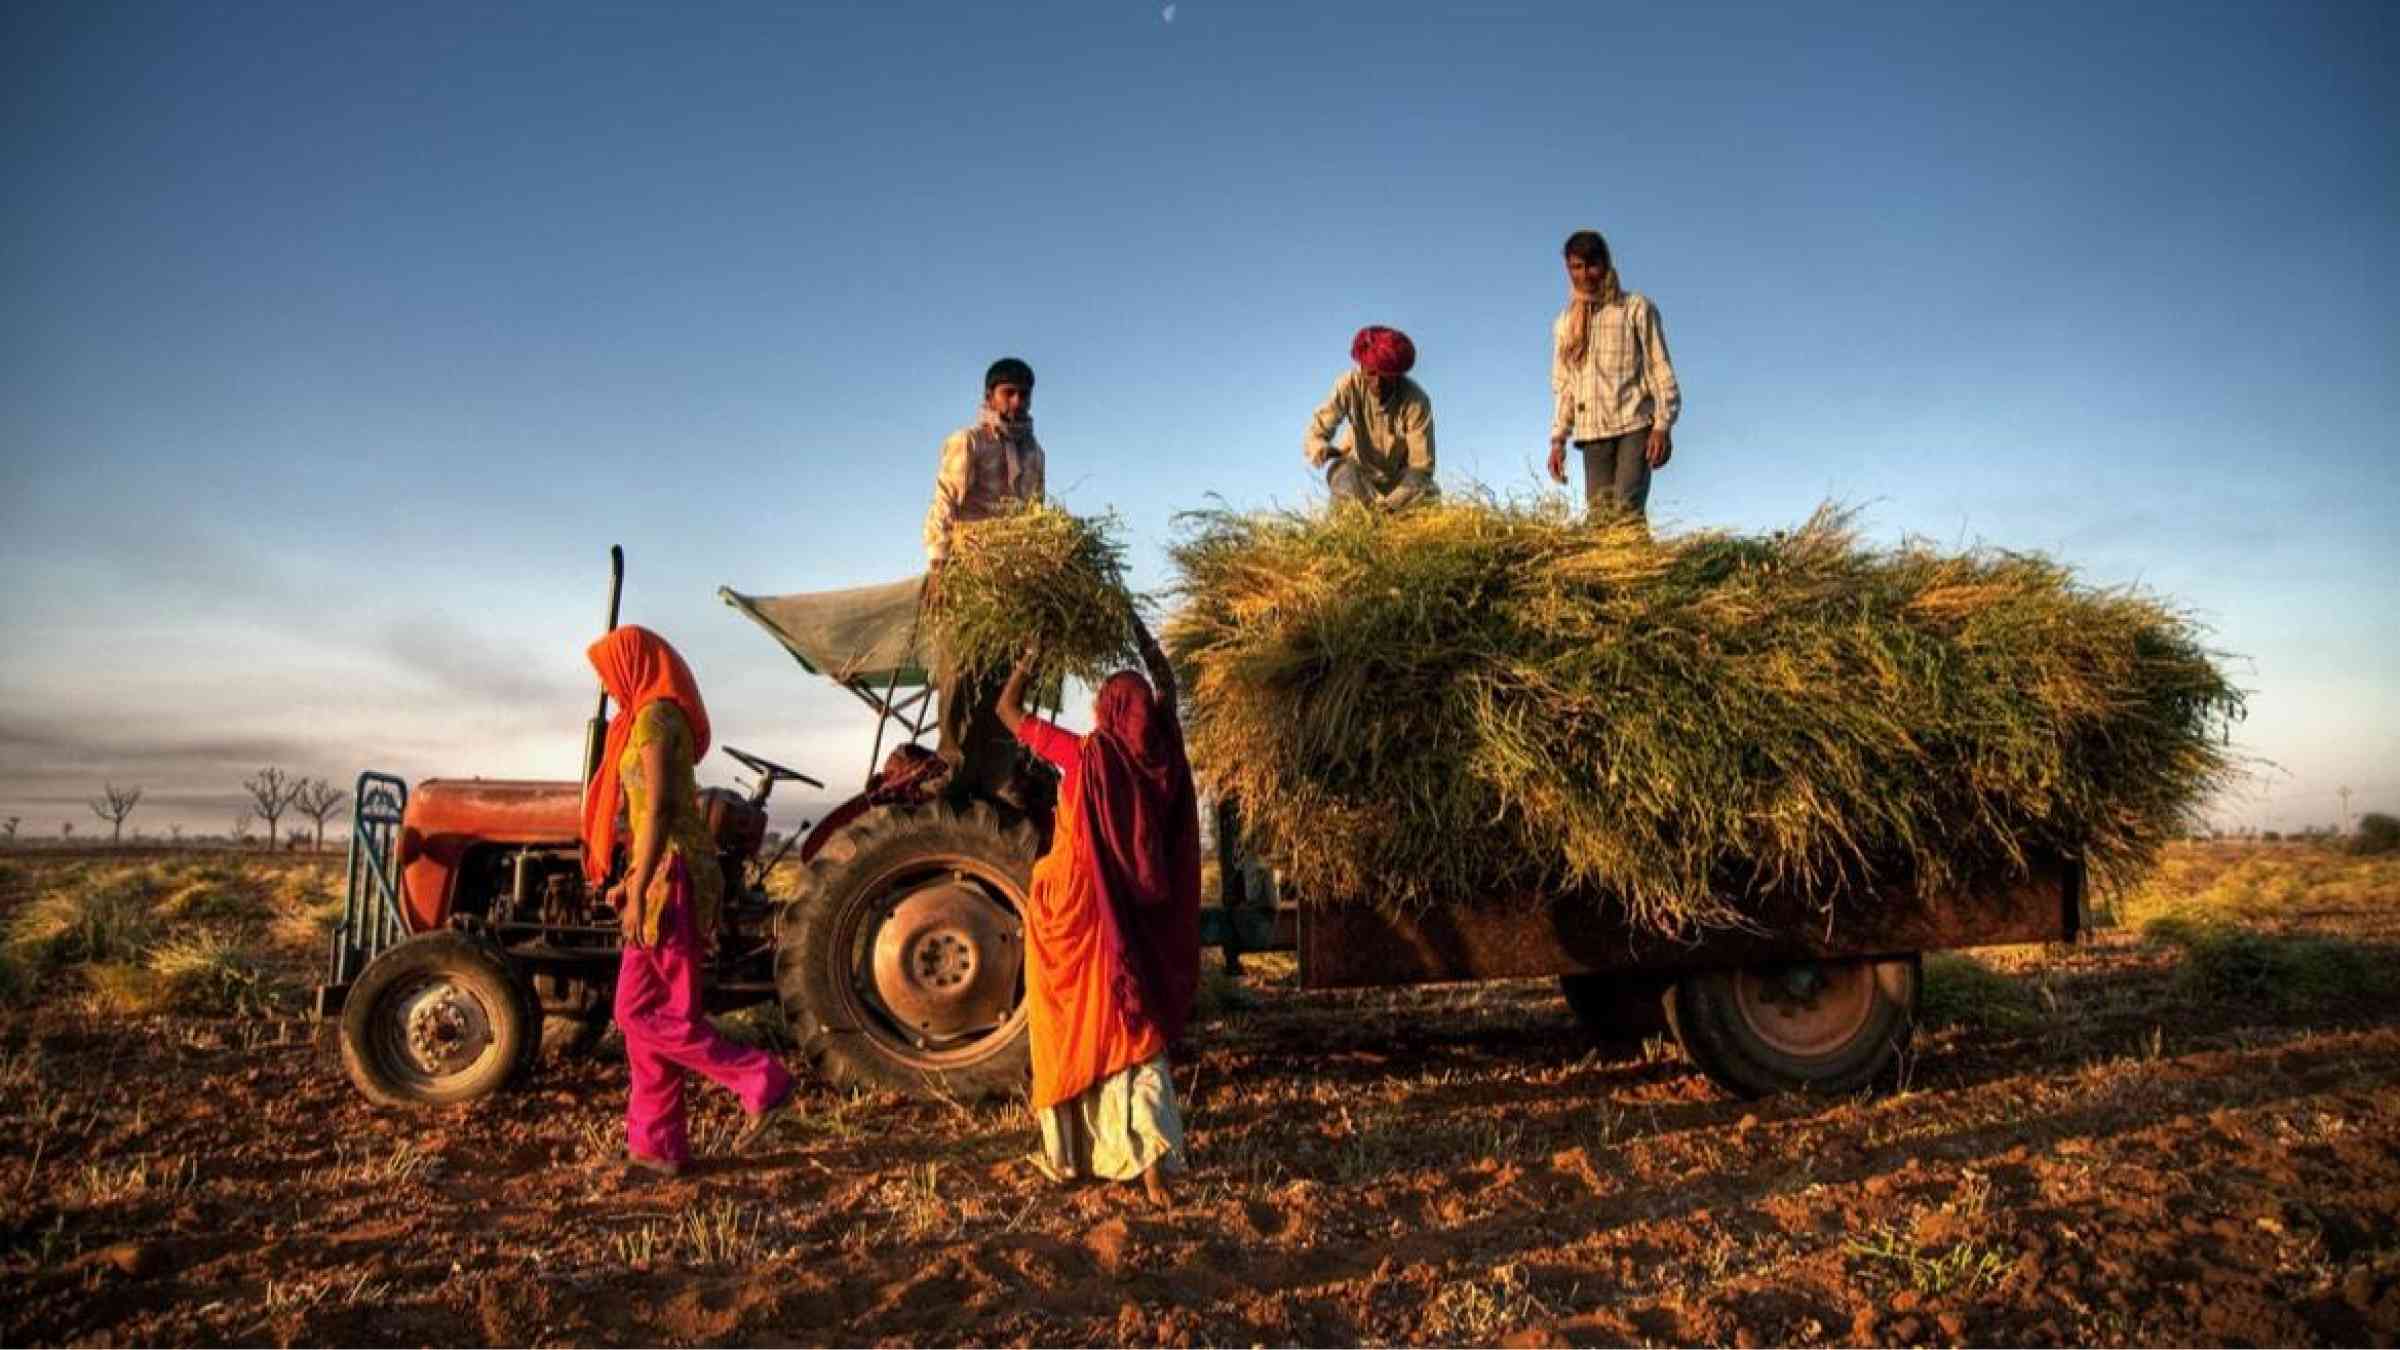 Family collecting their harvest on a truck, India